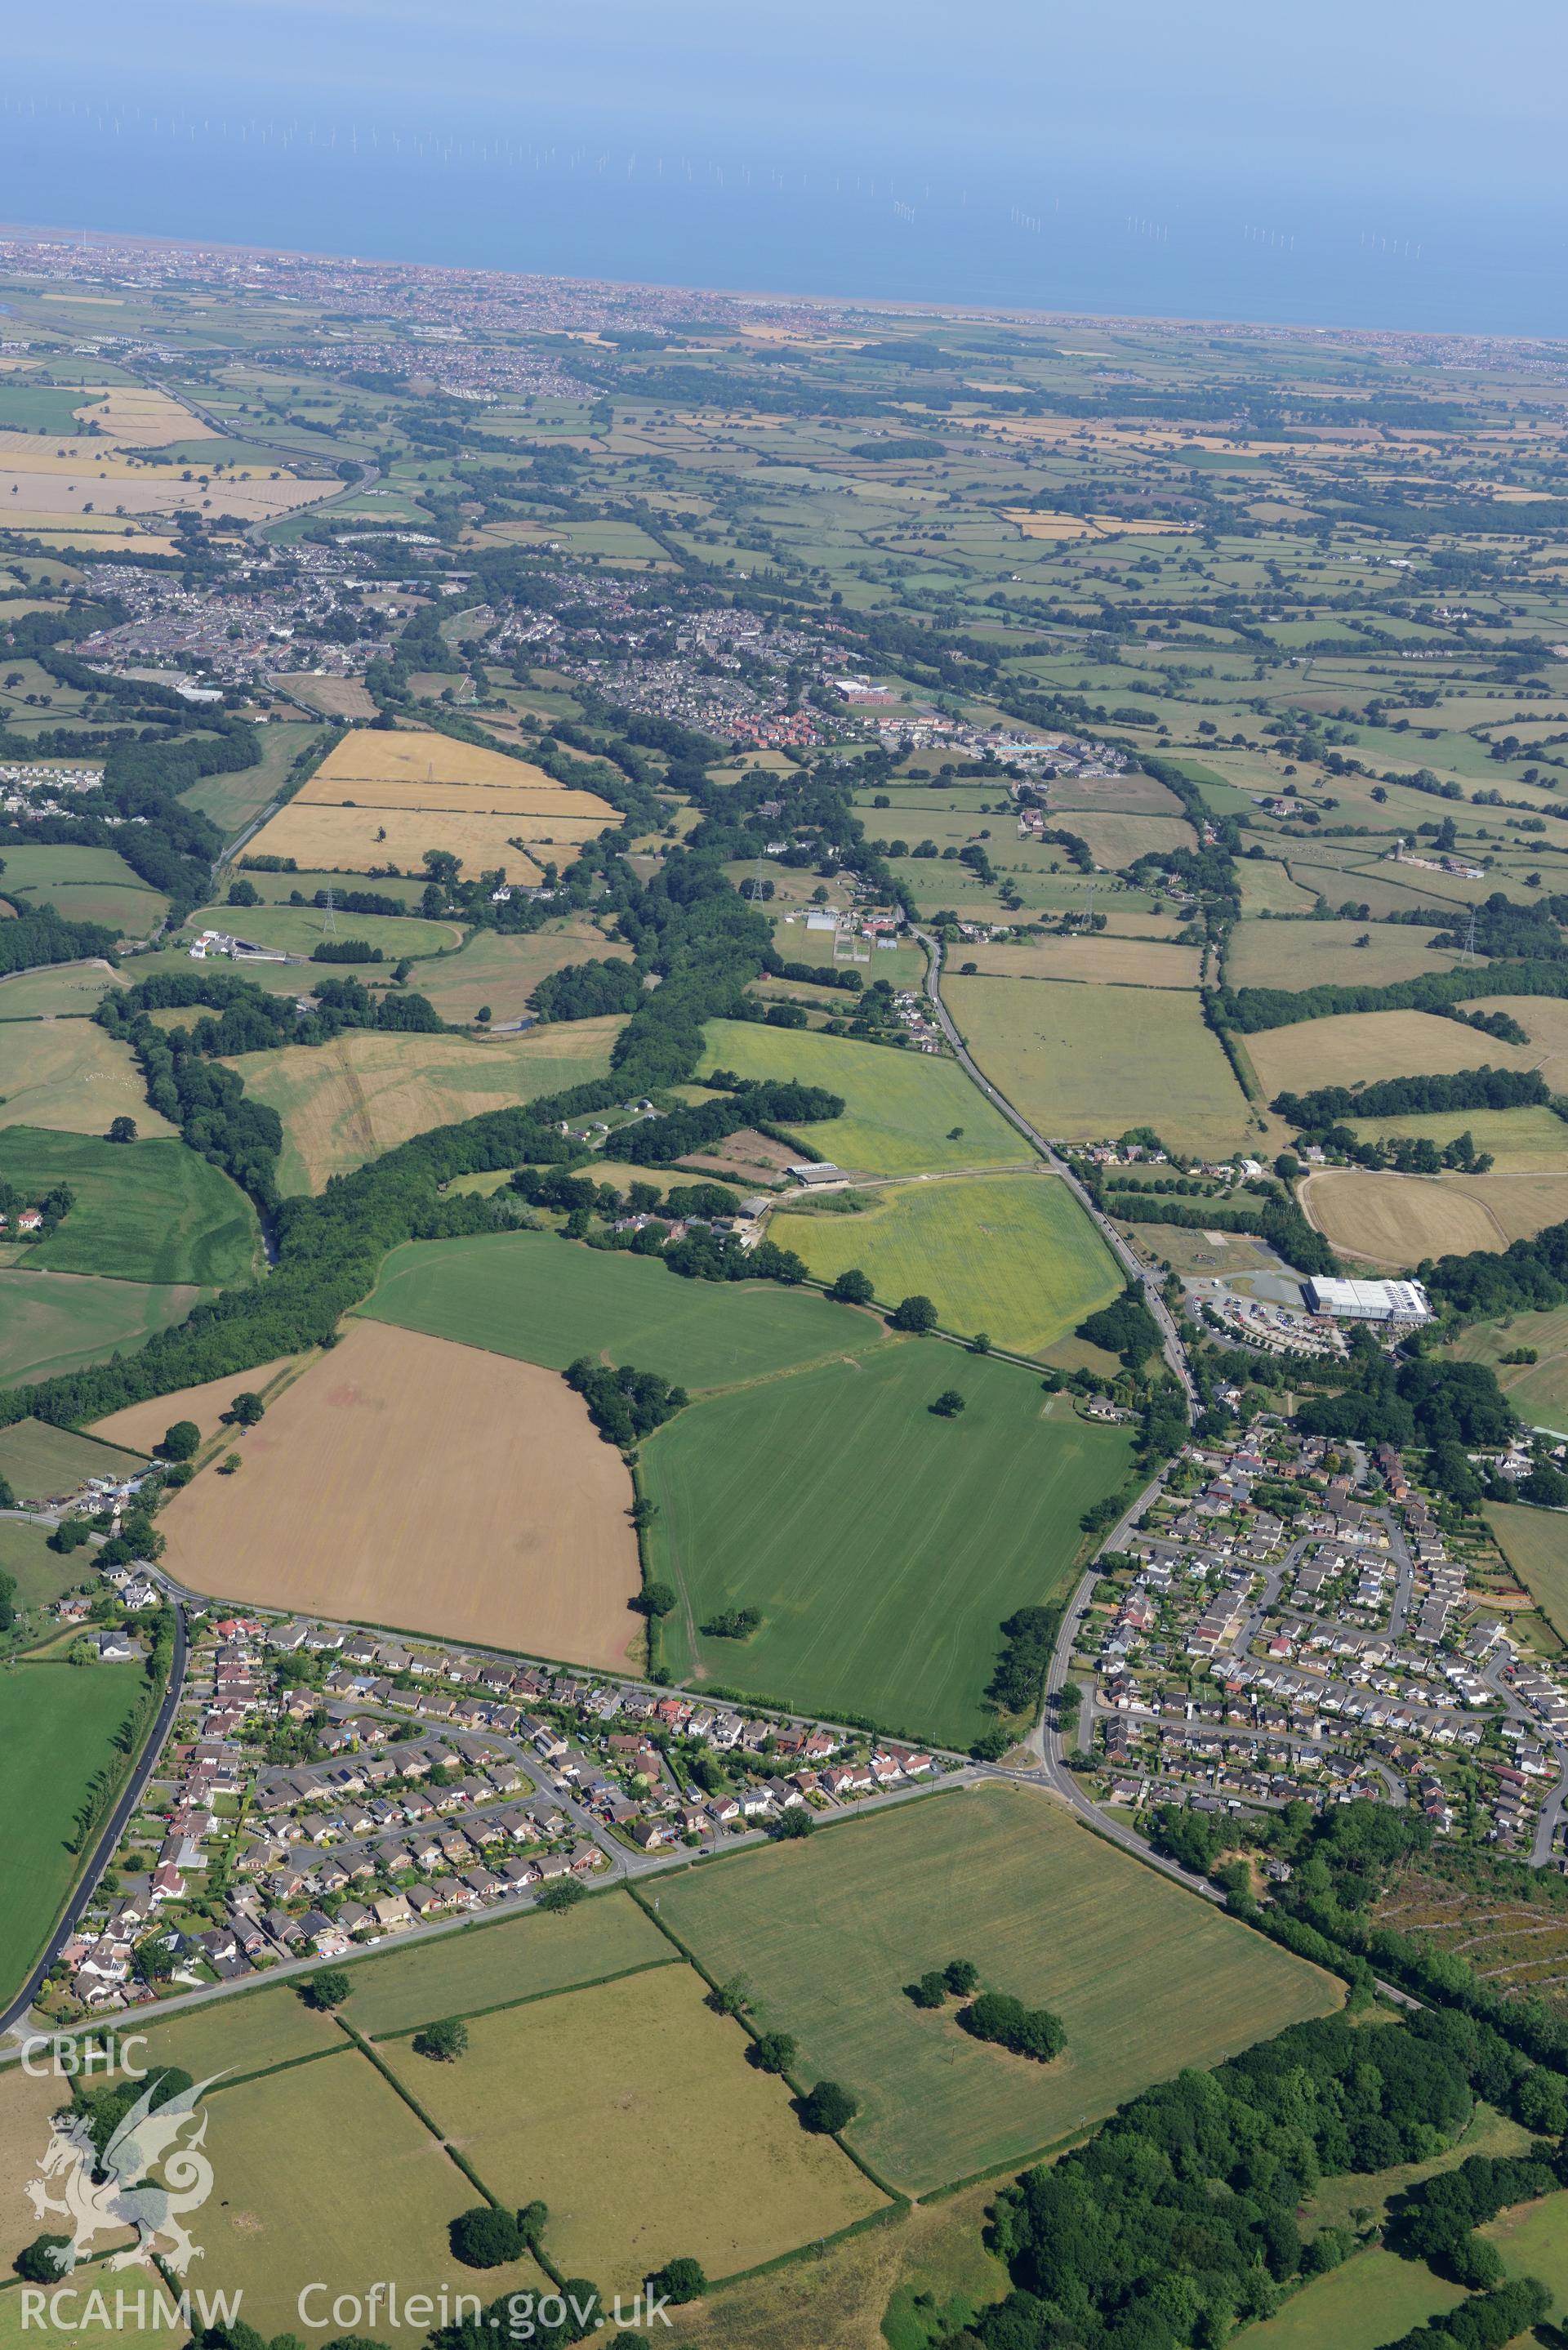 Royal Commission aerial photography of St Asaph, showing a landscape view from the south-west, taken on 19th July 2018 during the 2018 drought.